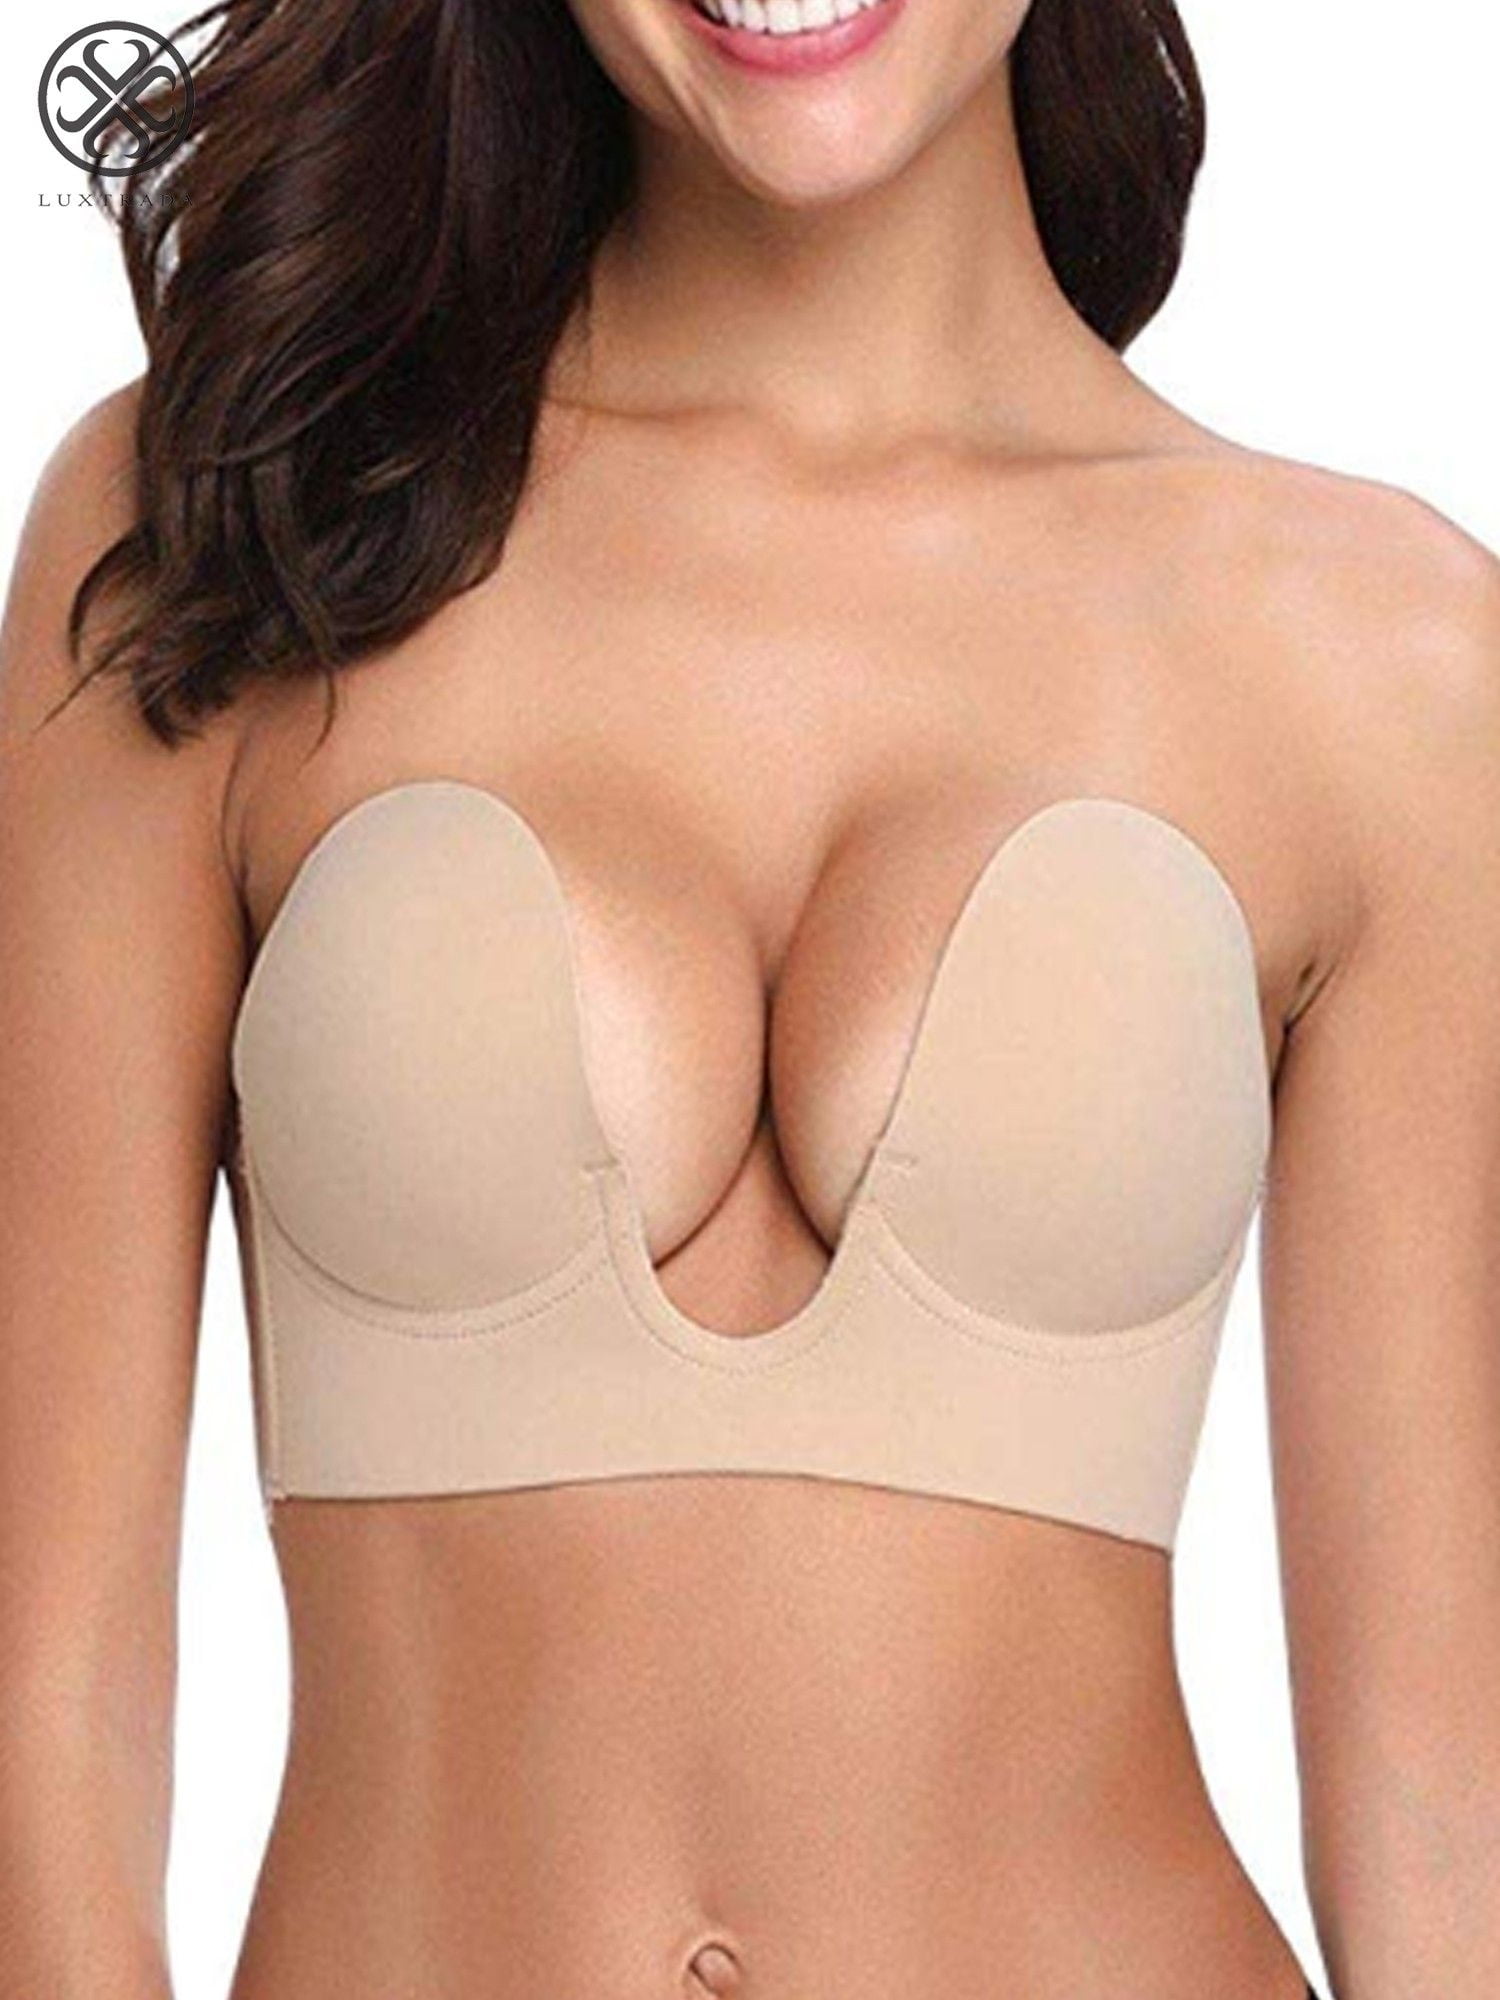 Luxtrada Strapless Bra Sticky Backless Bra Adhesive Bra Invisible Bras Silicone Push up Bra for 